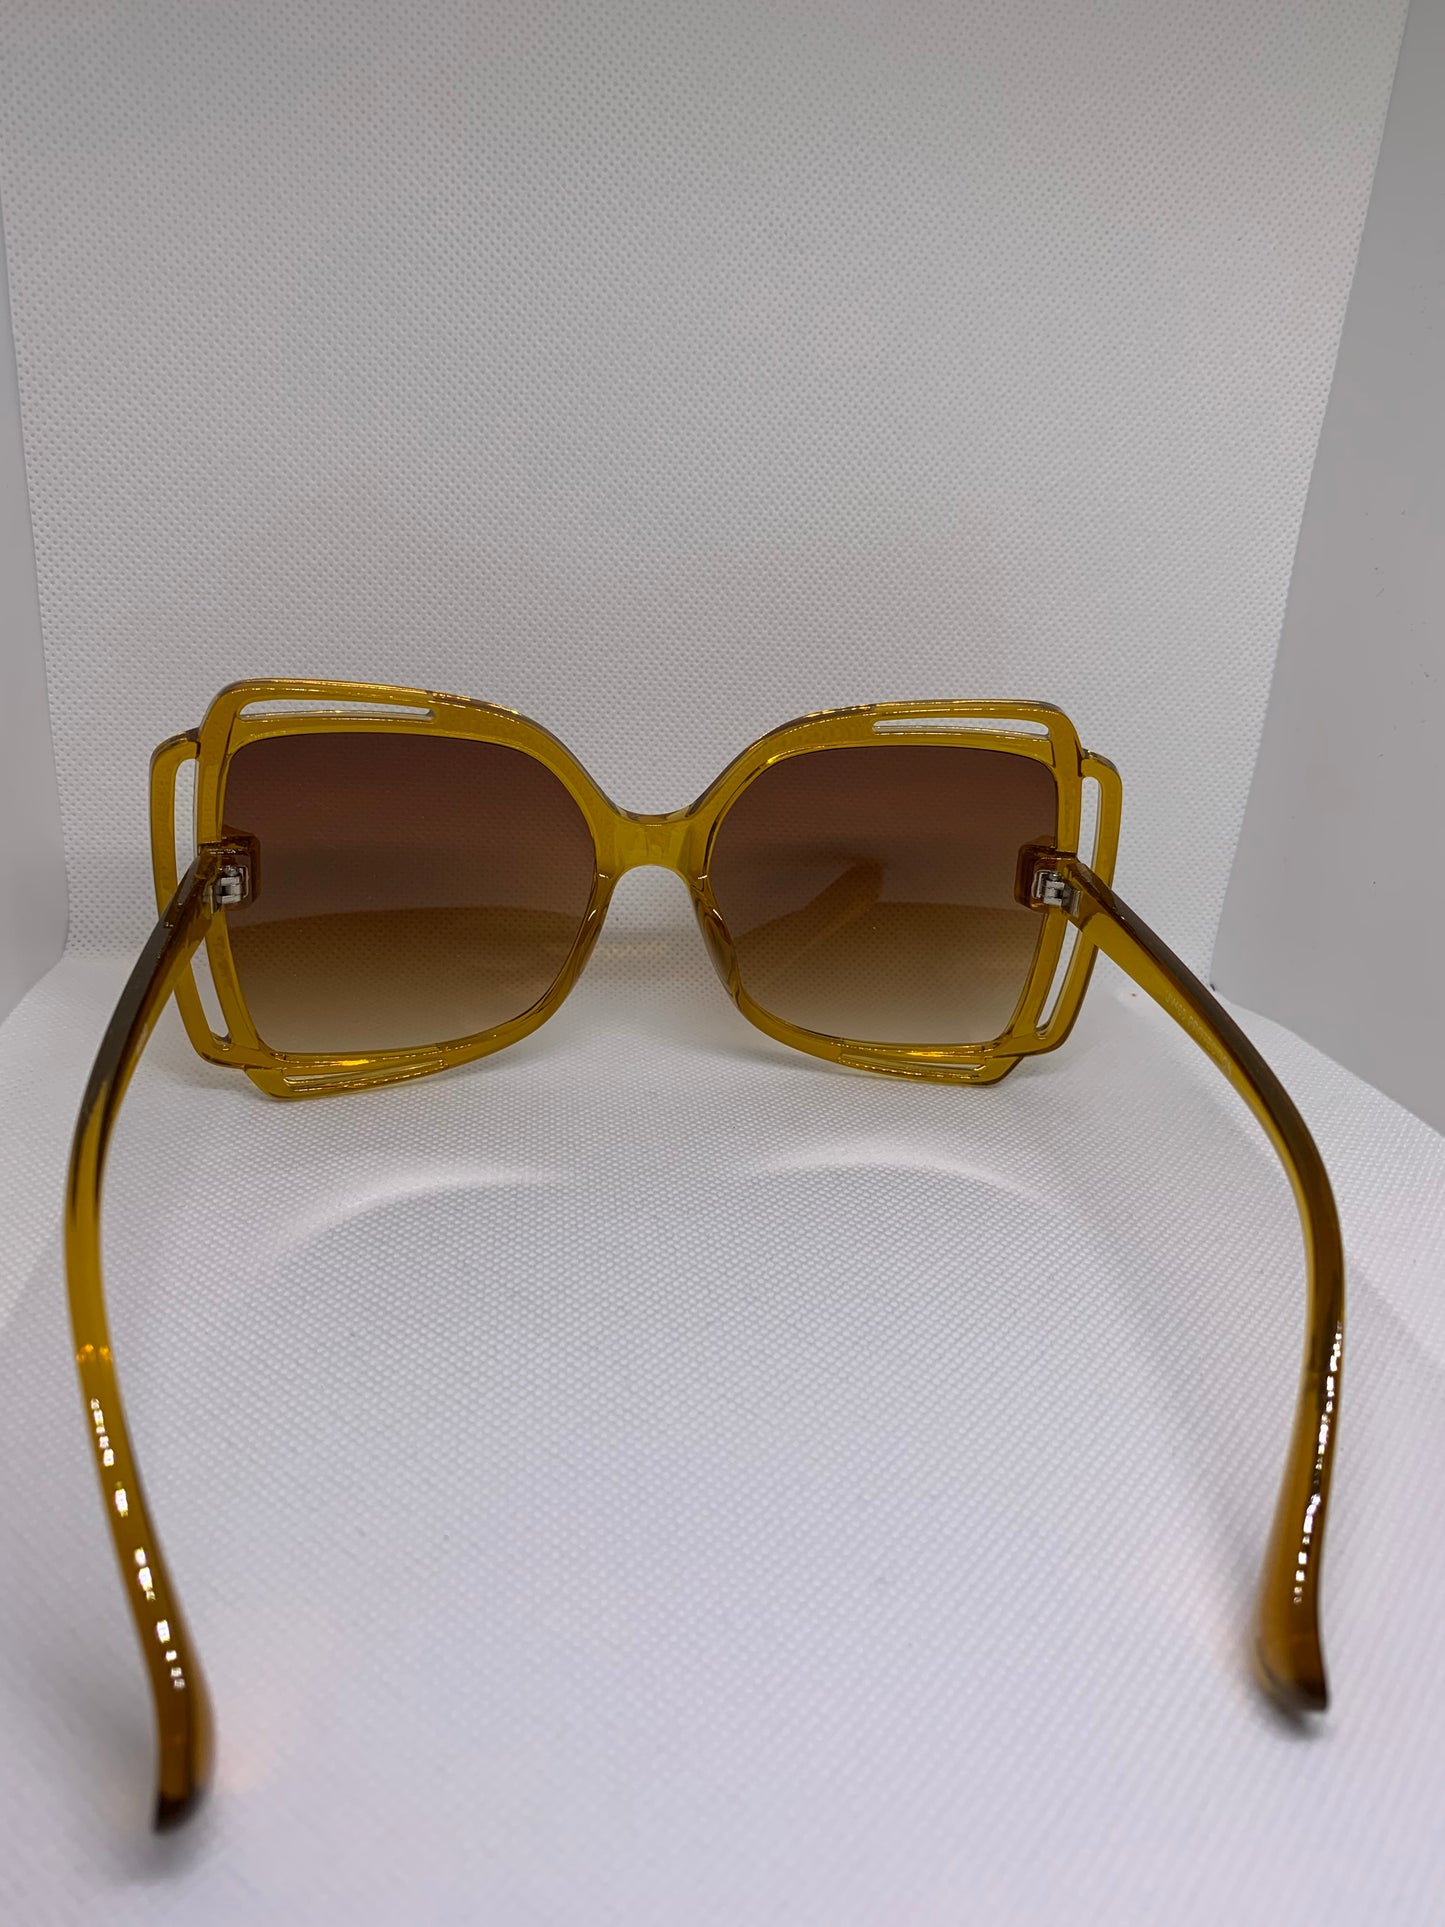 Large Vintage Inspired Square Overlapping Frame Sunglasses